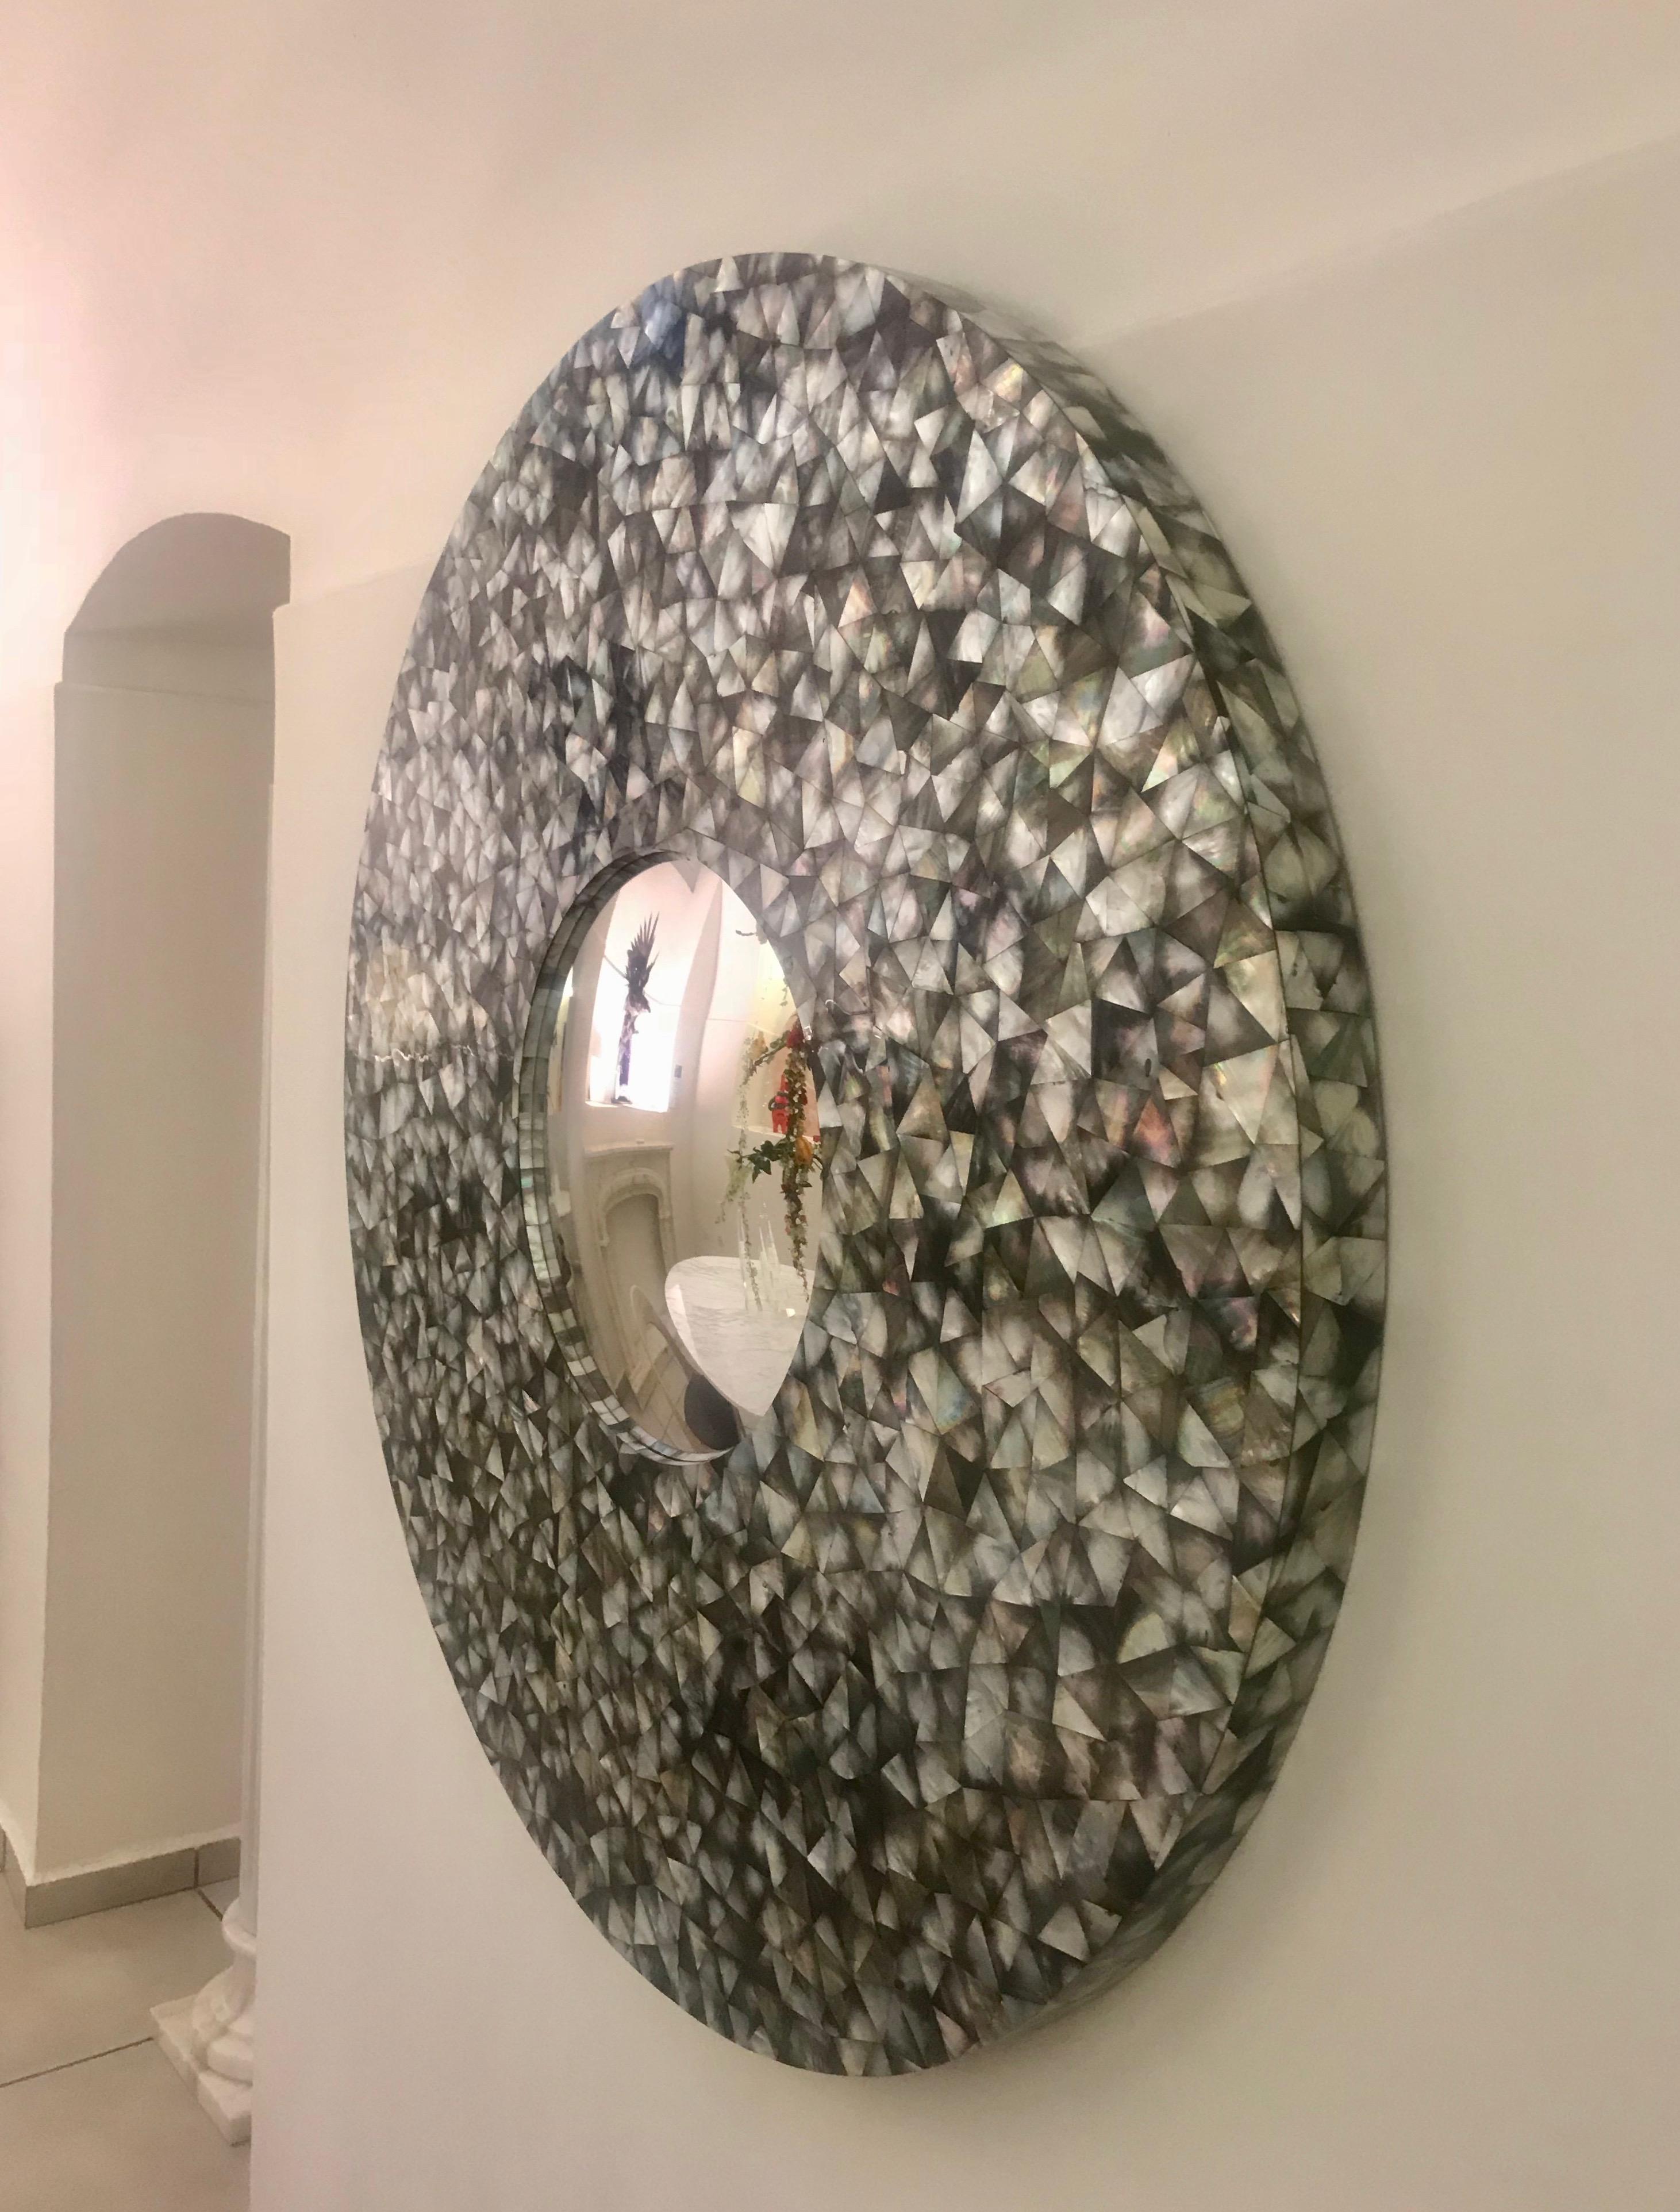 Spanish 'Crystal Sea' Large Convex Round Mirror with Black Mother of Pearl Frame For Sale